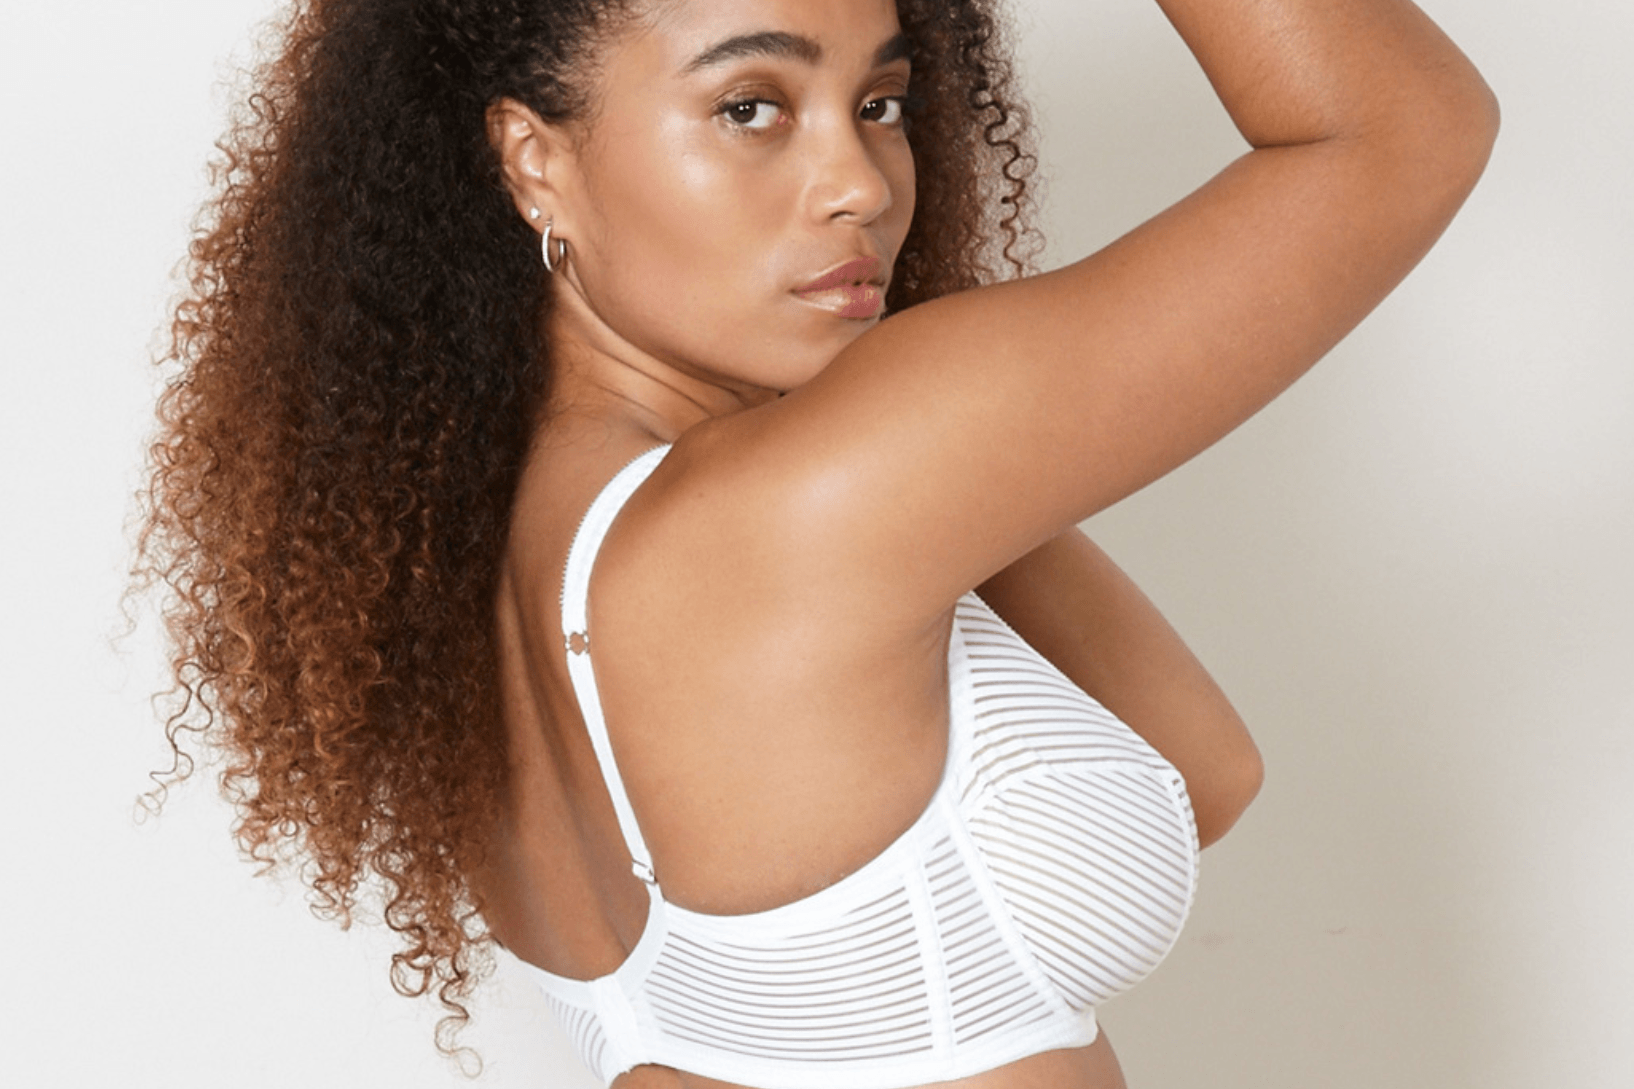 8 Common Misconceptions about Breasts and Bras